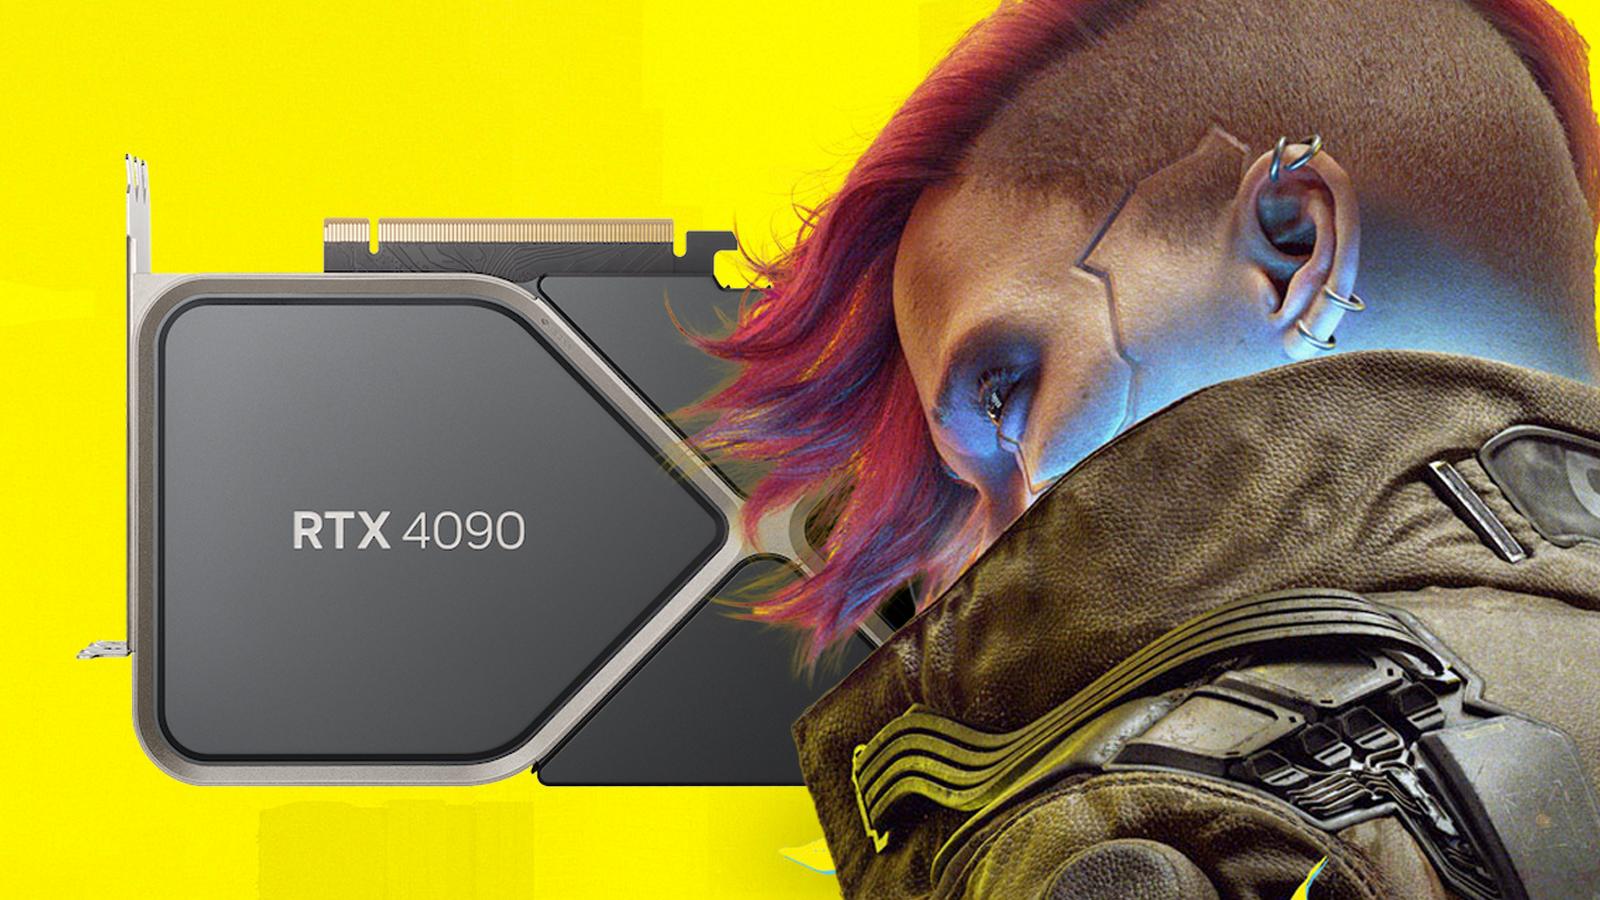 How to enable Ray Tracing Overdrive Mode in Cyberpunk 2077 - Dexerto